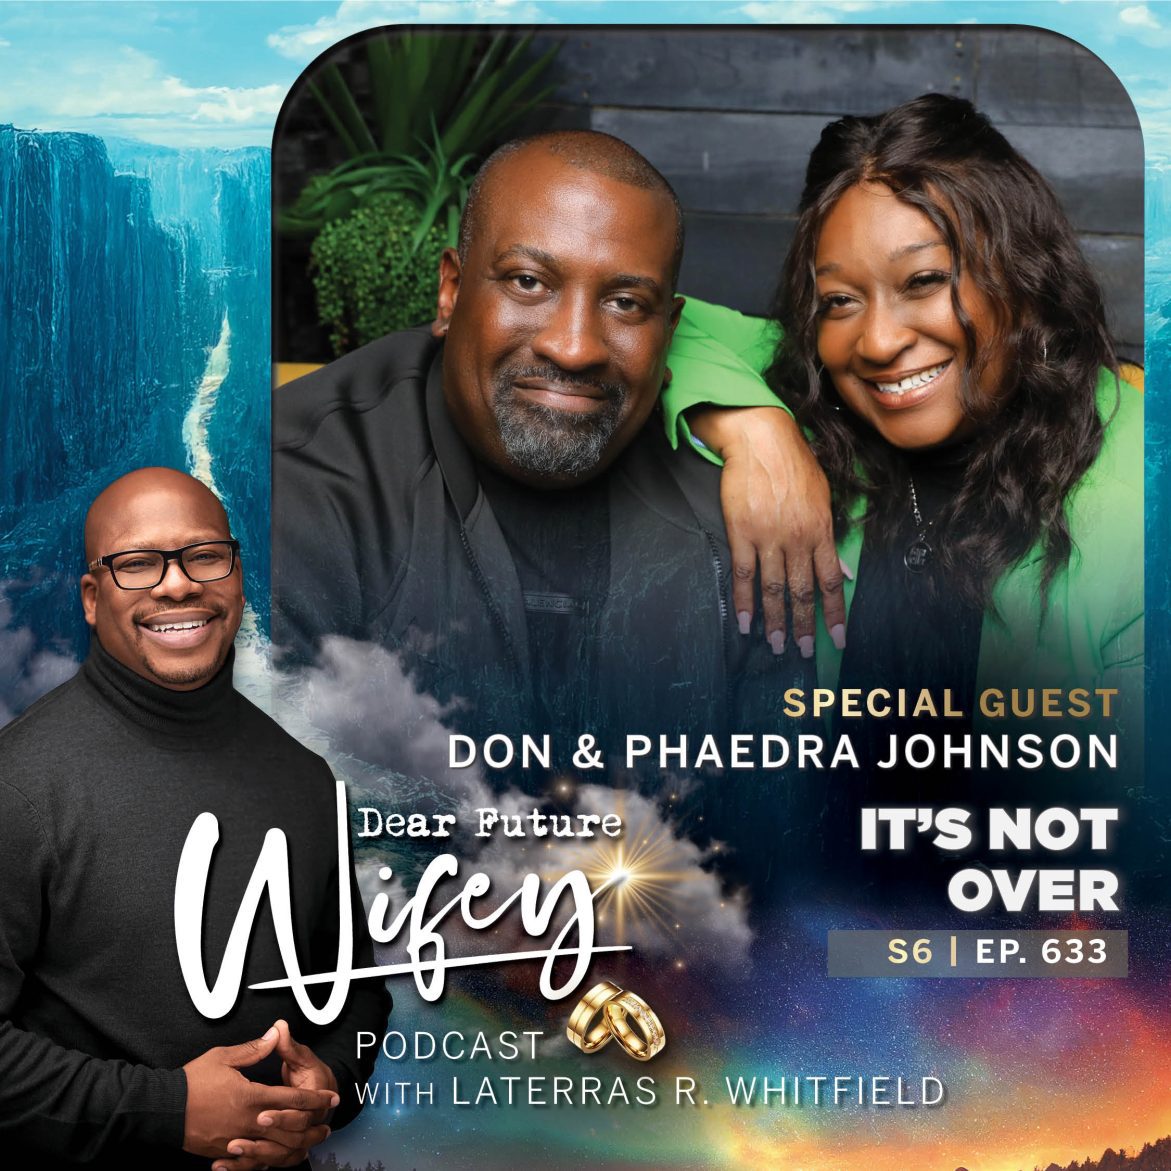 Black Podcasting - It's Not Over (Guest: Don & Phaedra Johnson)